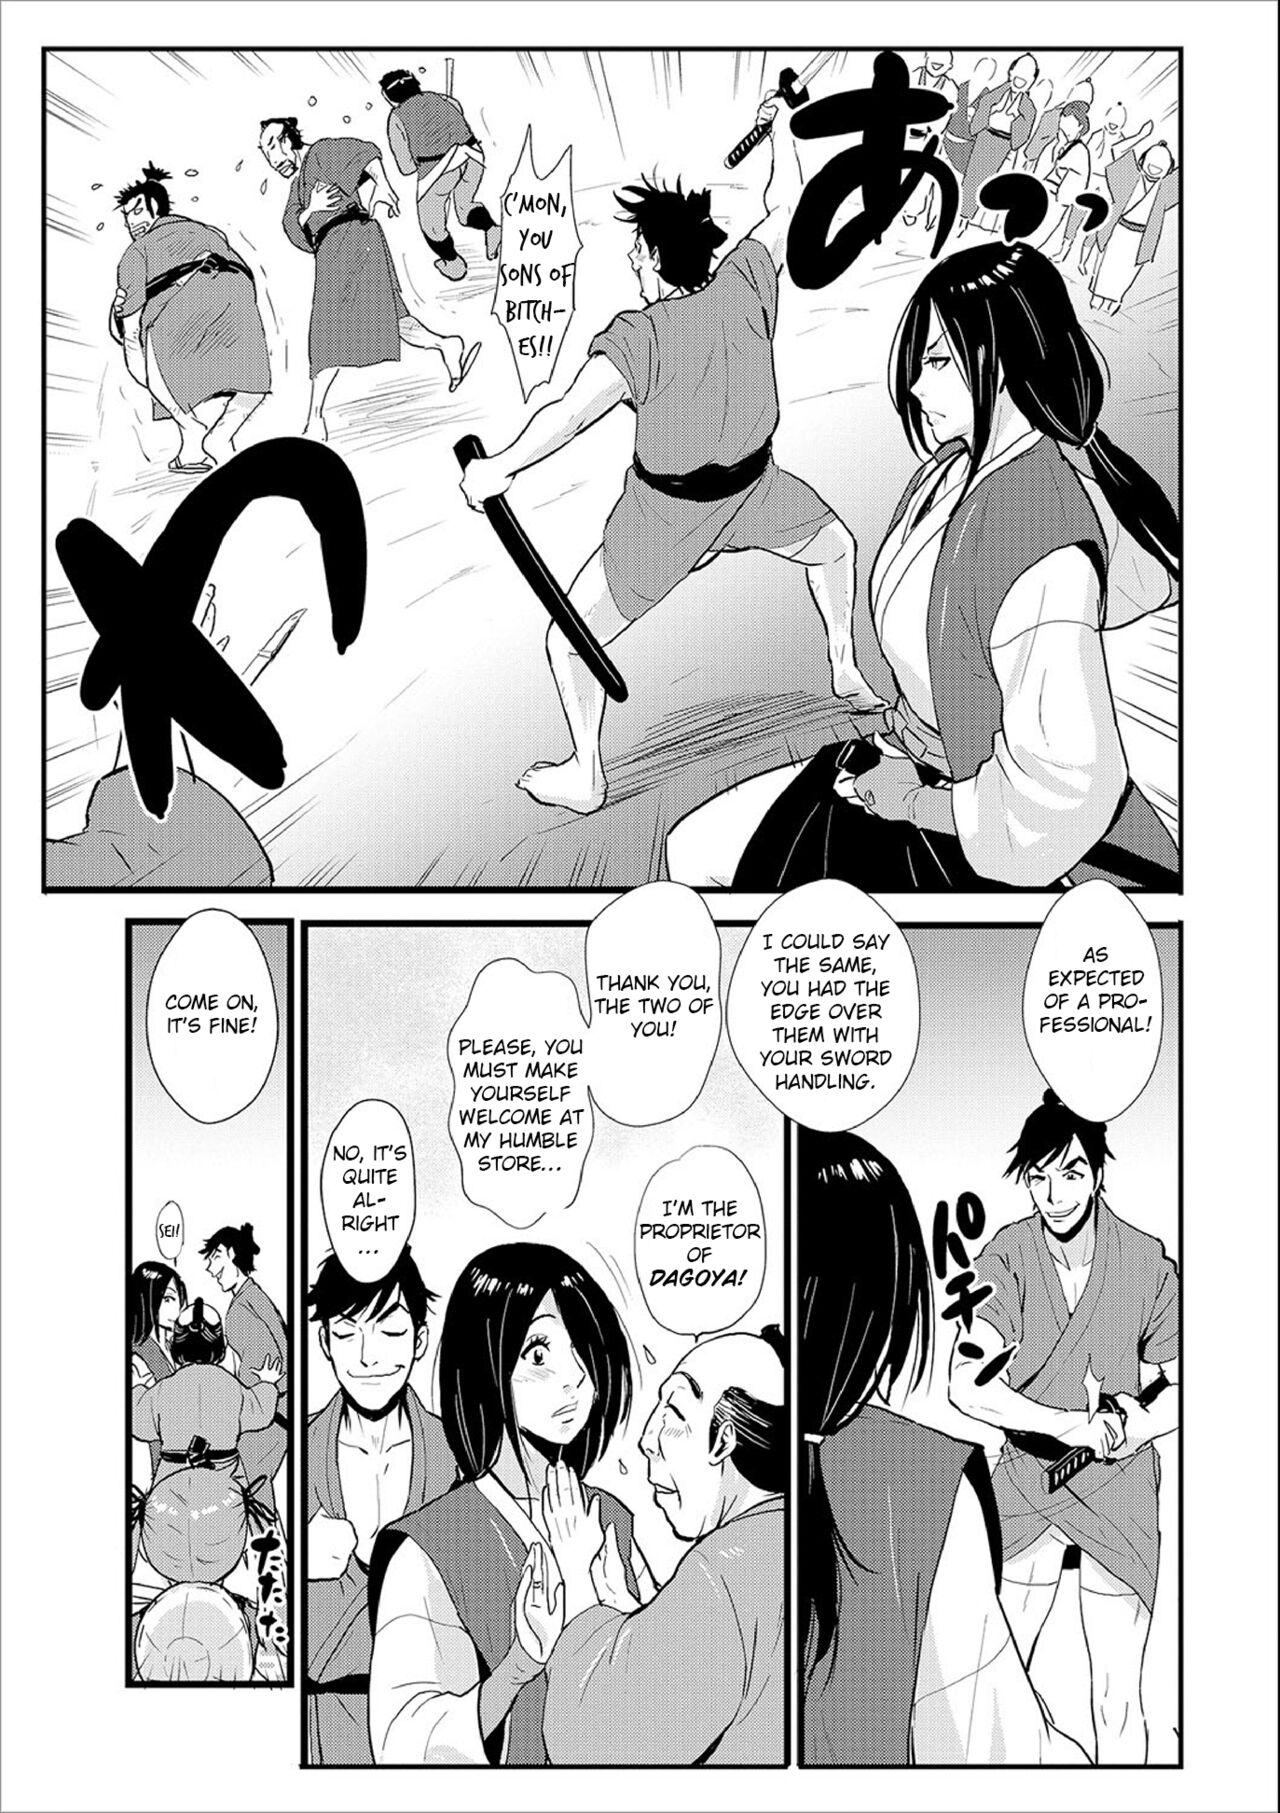 Knocked Up Samurai 02: The Post Town and the Ronin, Tied and Teased 6